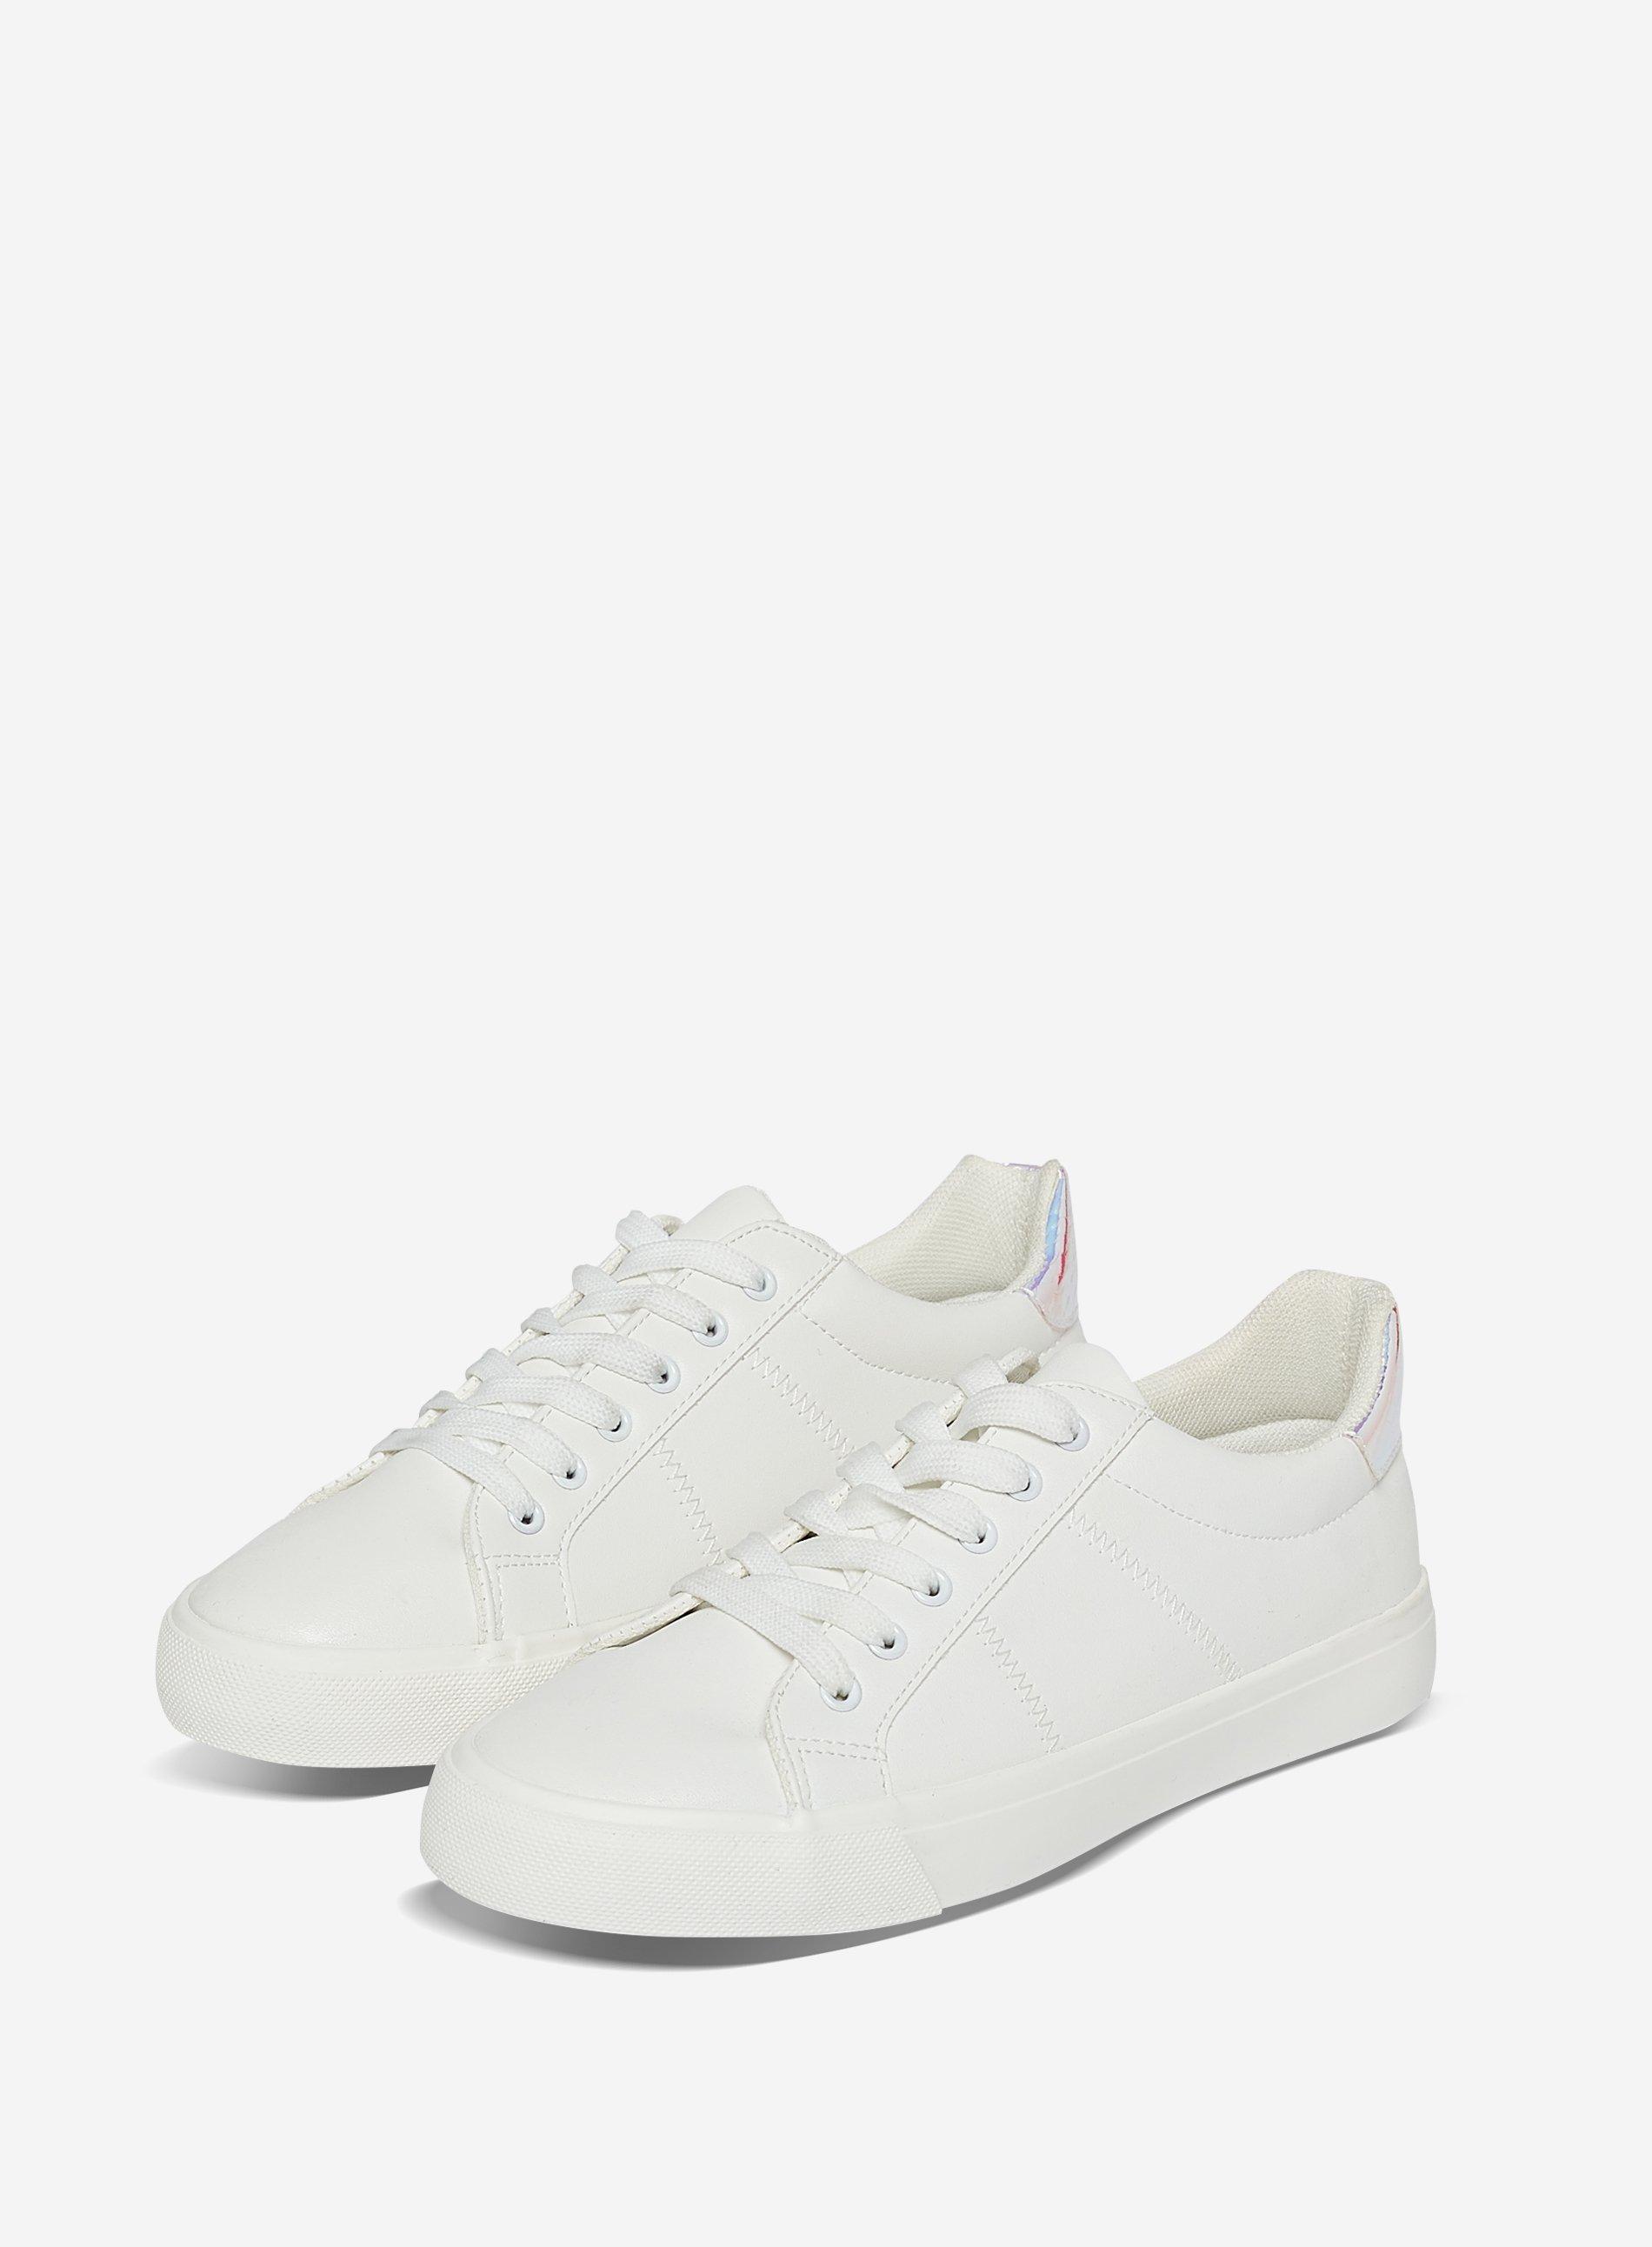 Trainers | White Ink Trainers | Dorothy Perkins